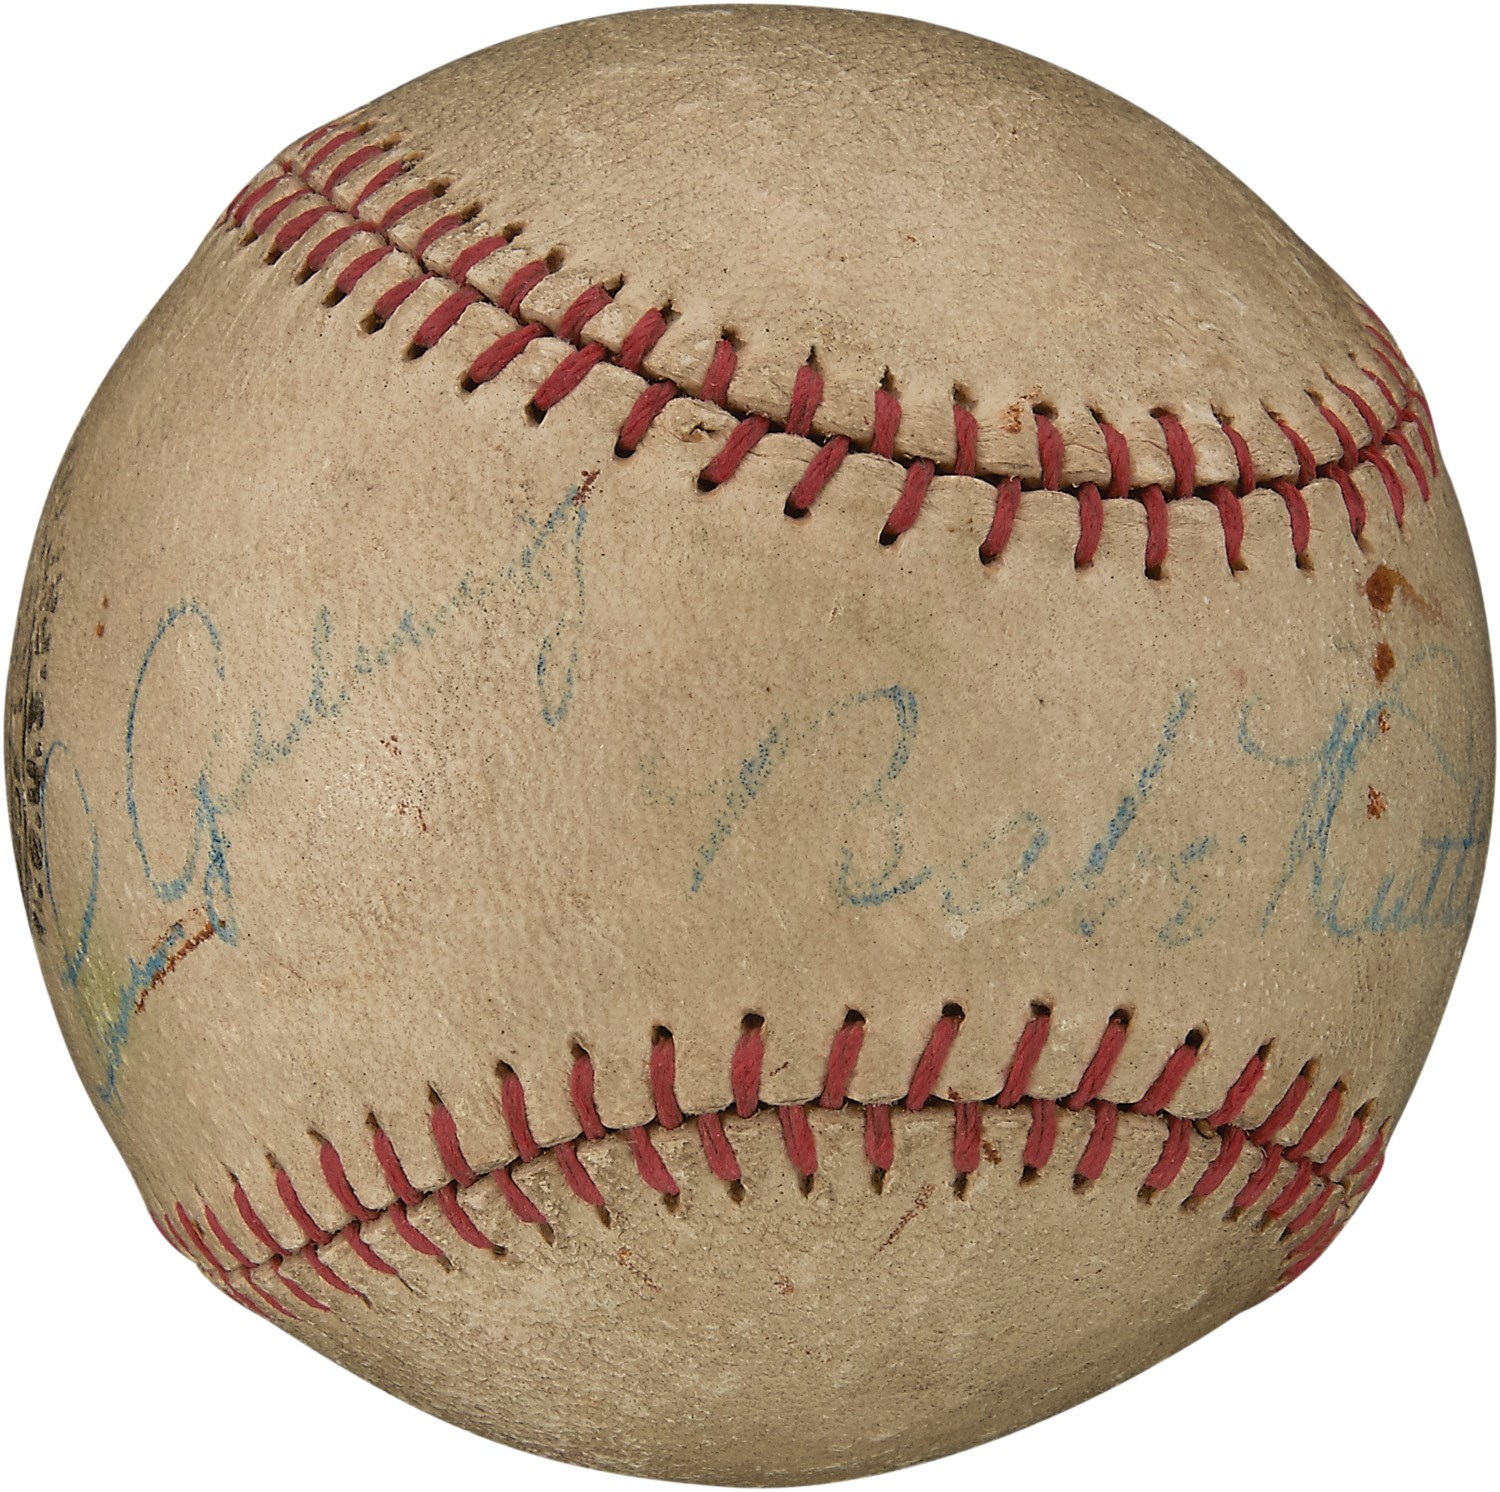 Circa 1930 Babe Ruth & Lou Gehrig Side-by-Side Dual Signed Baseball (PSA & SGC)